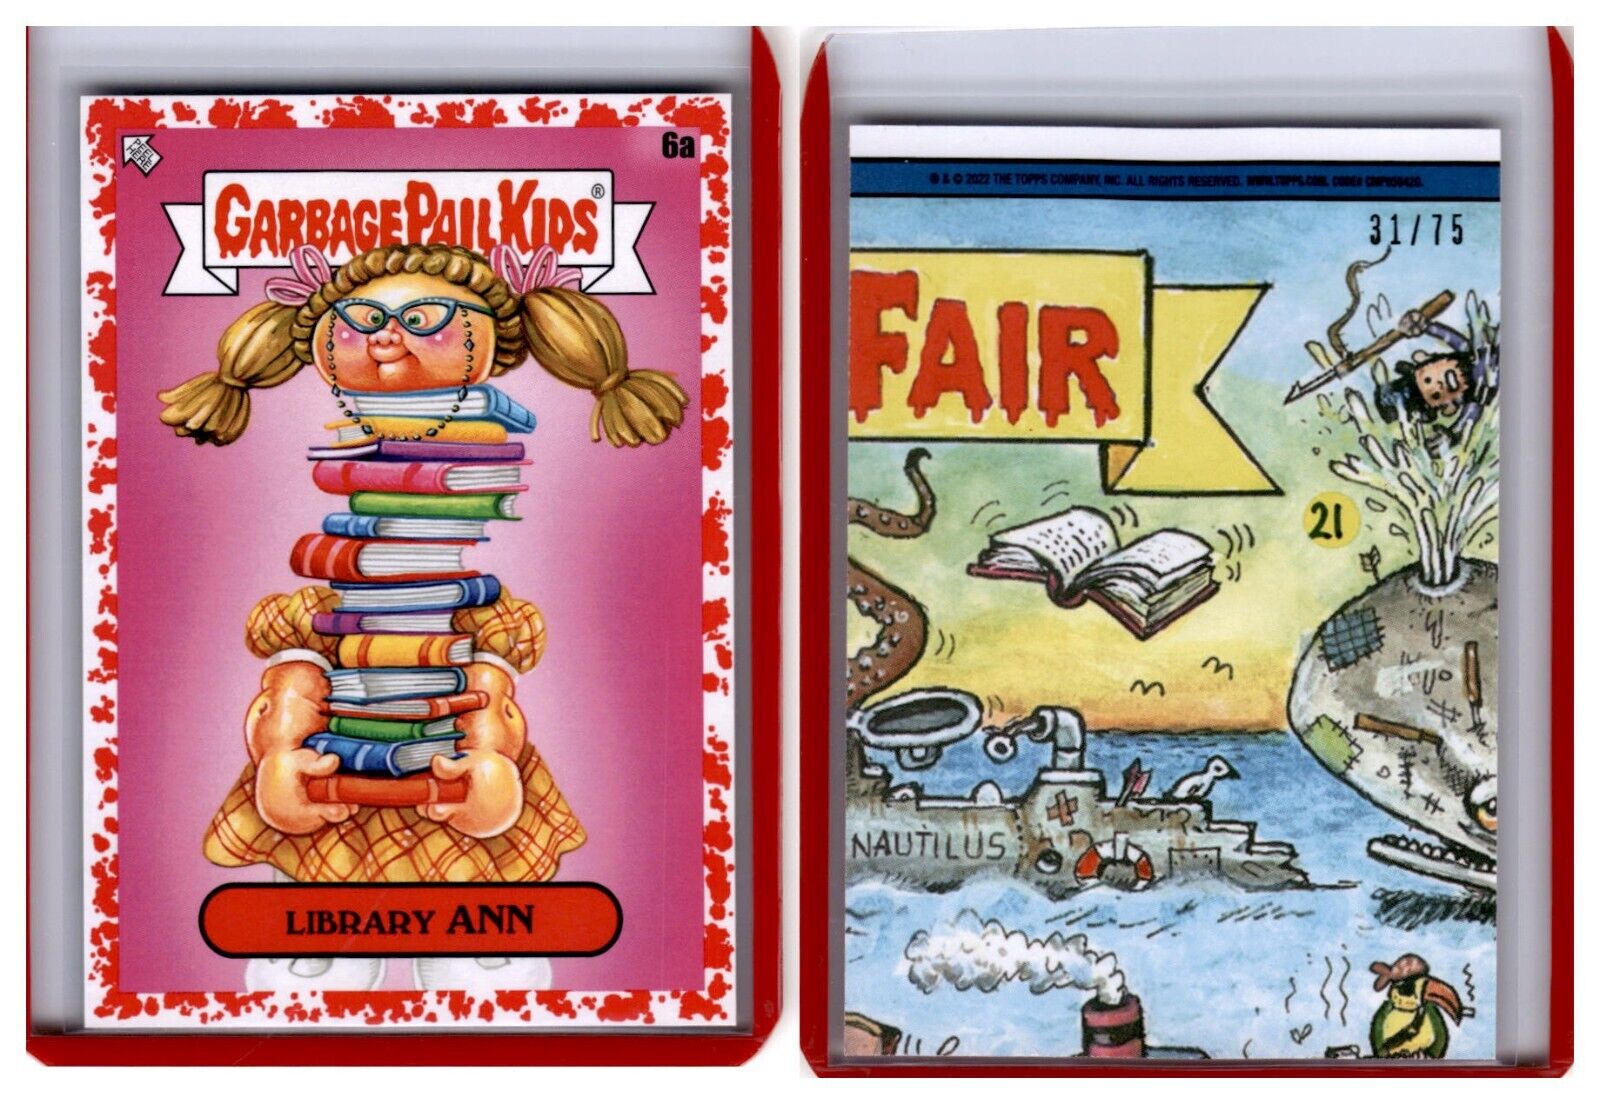 2022 Topps Garbage Pail Kids Bookworms Red Herring Red #6 LIBRARY ANN /75